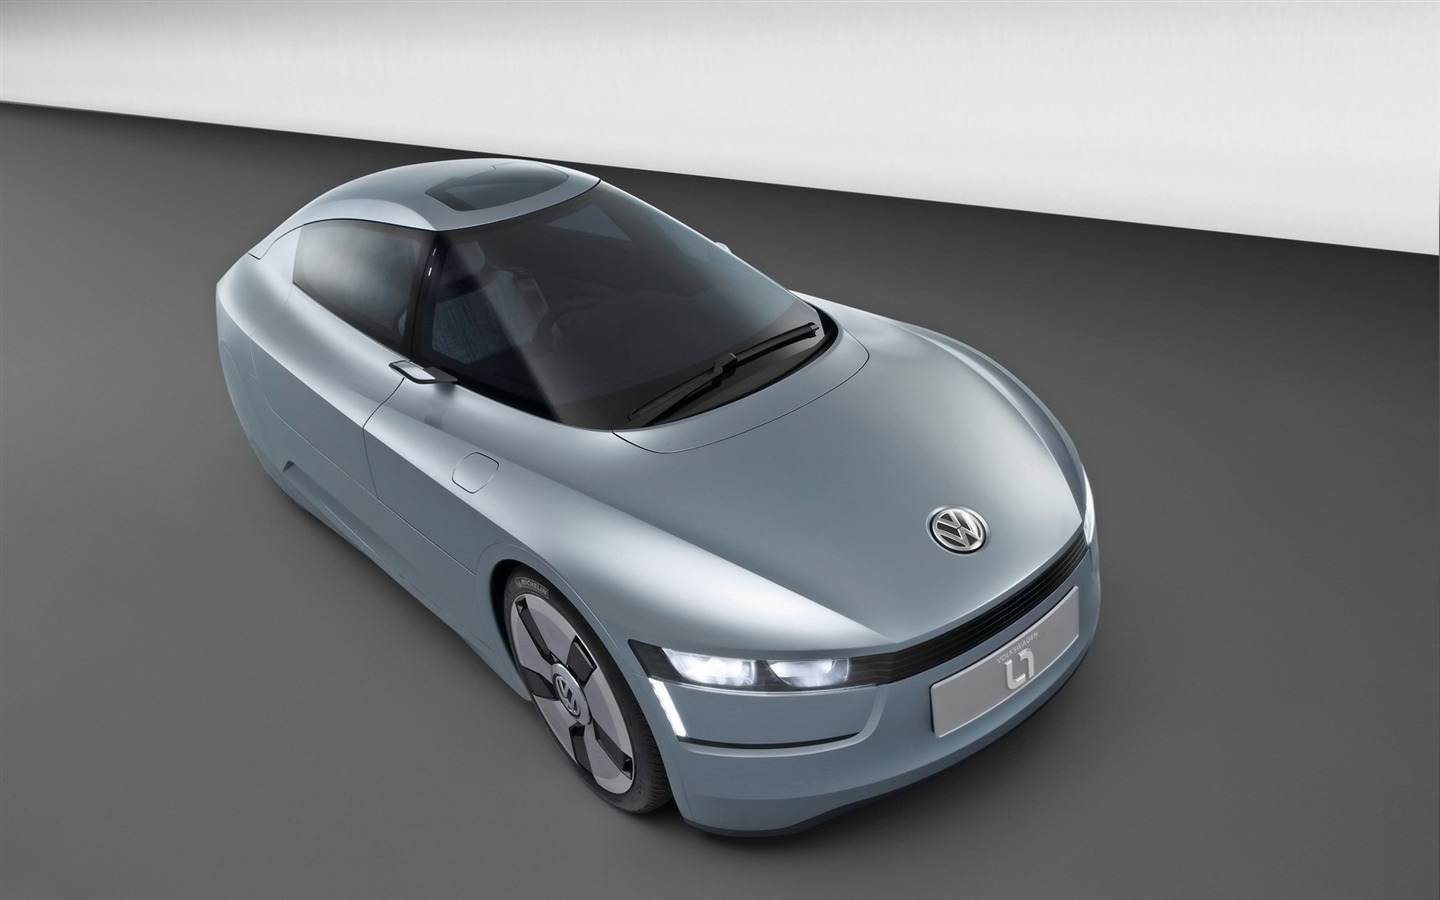 Volkswagen L1 Tapety Concept Car #21 - 1440x900